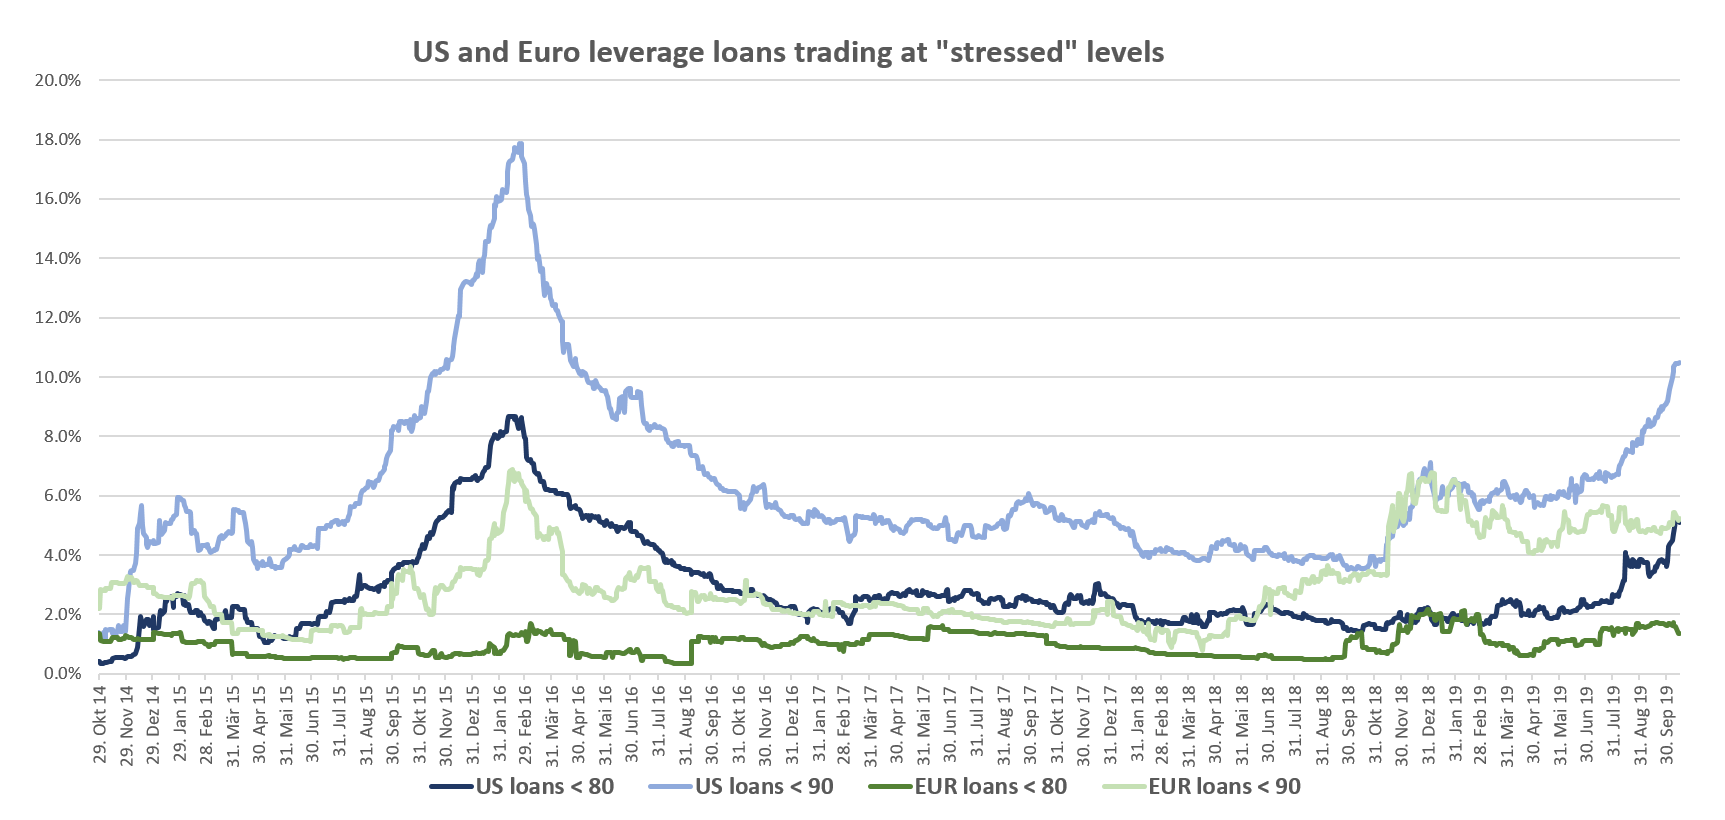 2019-10-30_24_what-does-us-loan-underperformance-mean-for-bondholders_chart